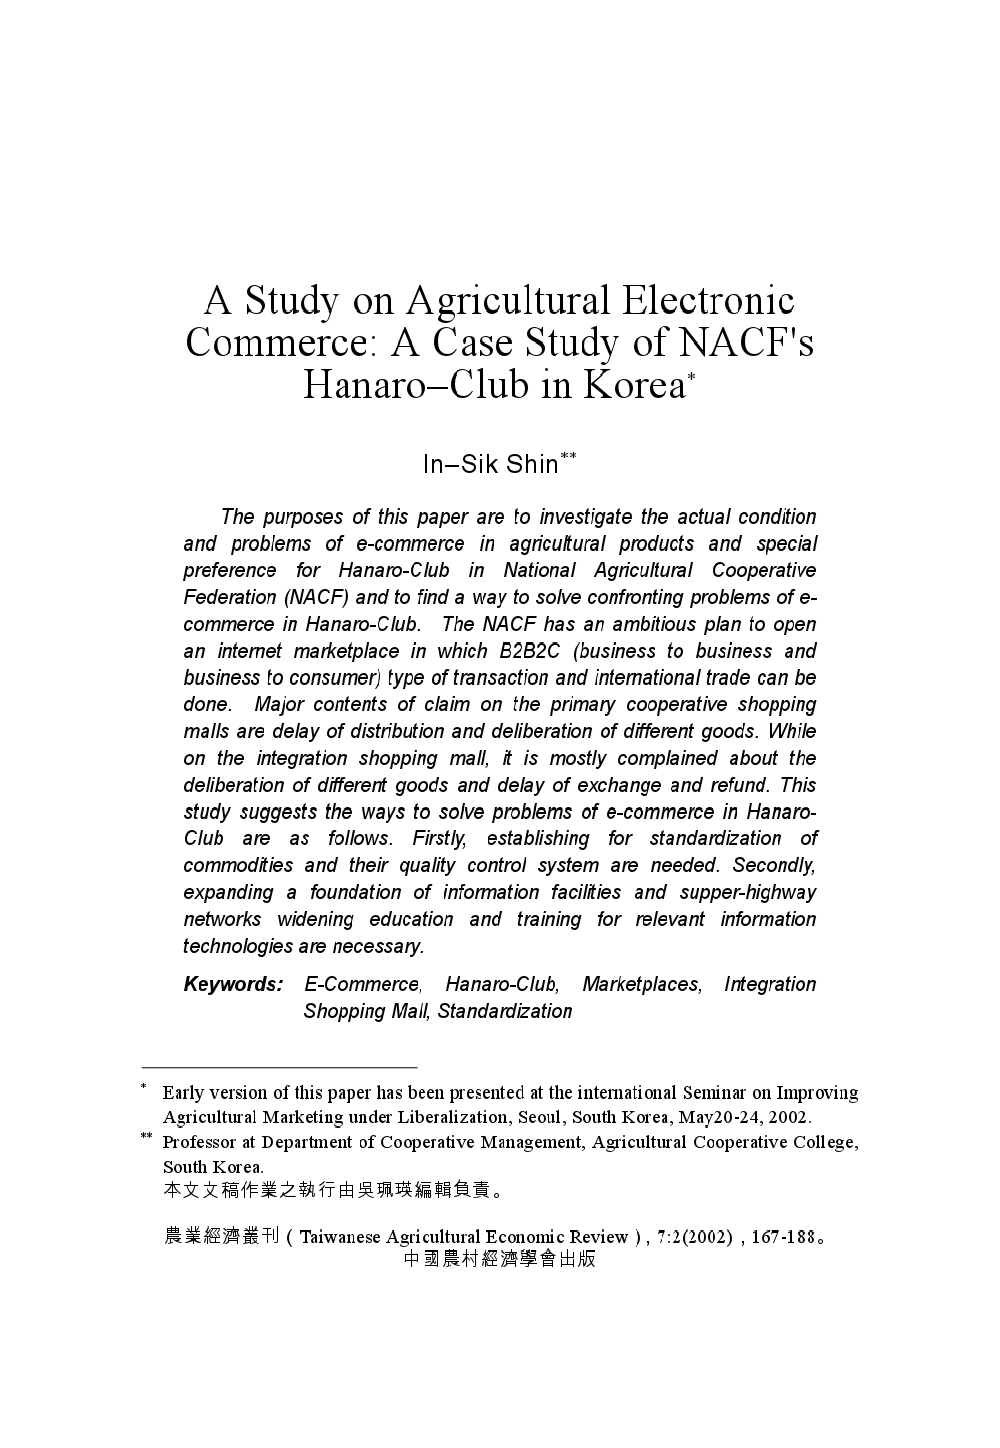 A_Study_on_Agricultural_Electronic_Commerce-A_Case_Study_of_NACF_s_Hanaro-Club_in_Korea.jpg